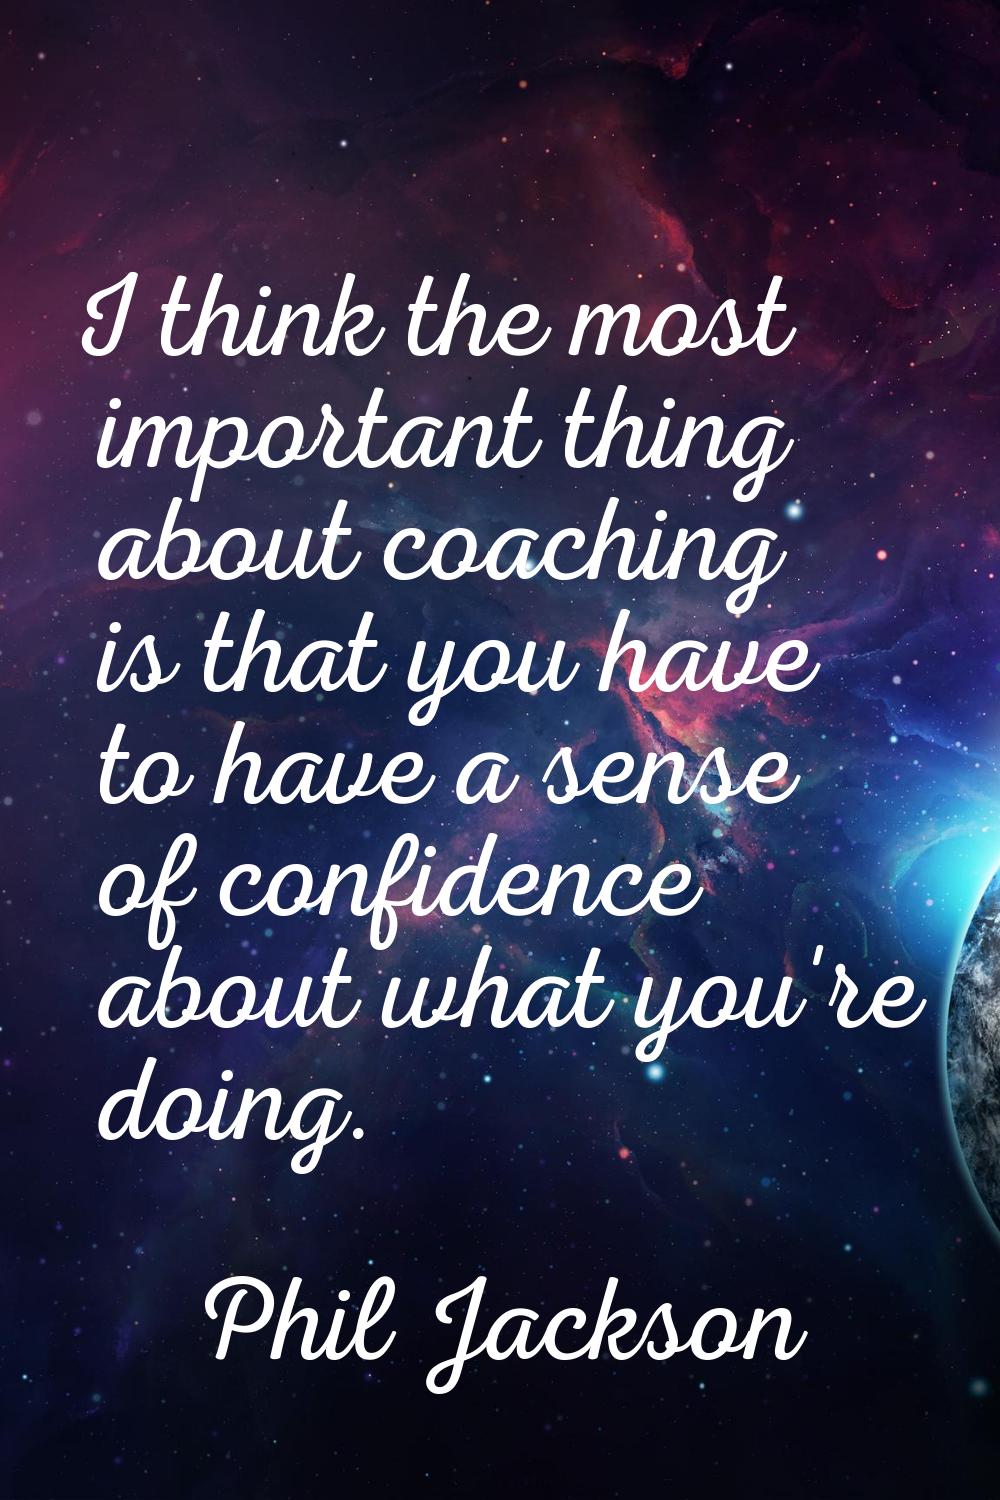 I think the most important thing about coaching is that you have to have a sense of confidence abou